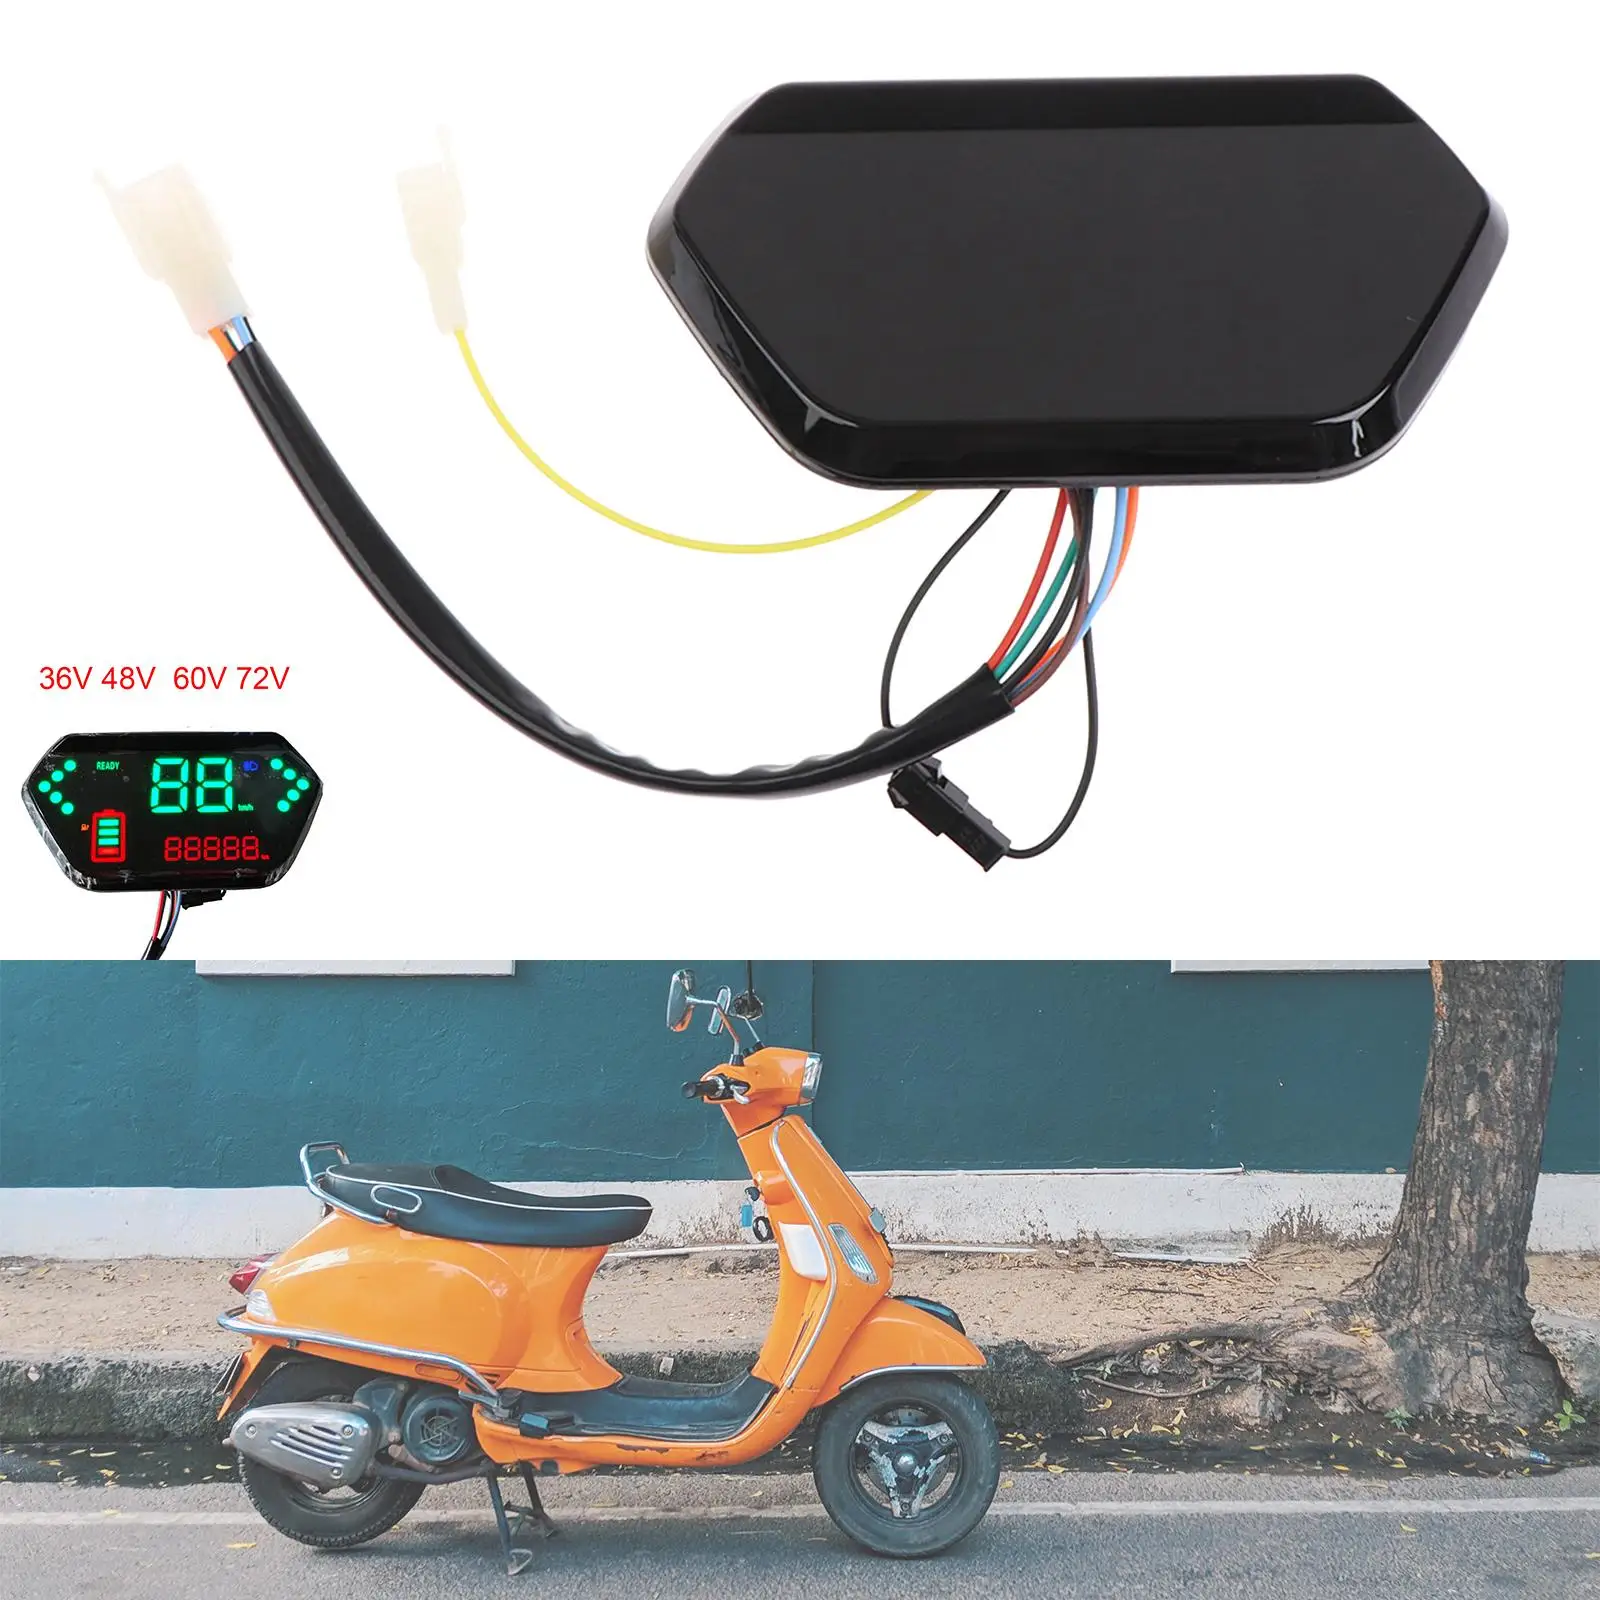 Electric Bicycle LCD Display Speedometer 36V 48V 60V 72V Speed Meter Bike Odometer Electric Vehicle Parts Accessories Durable